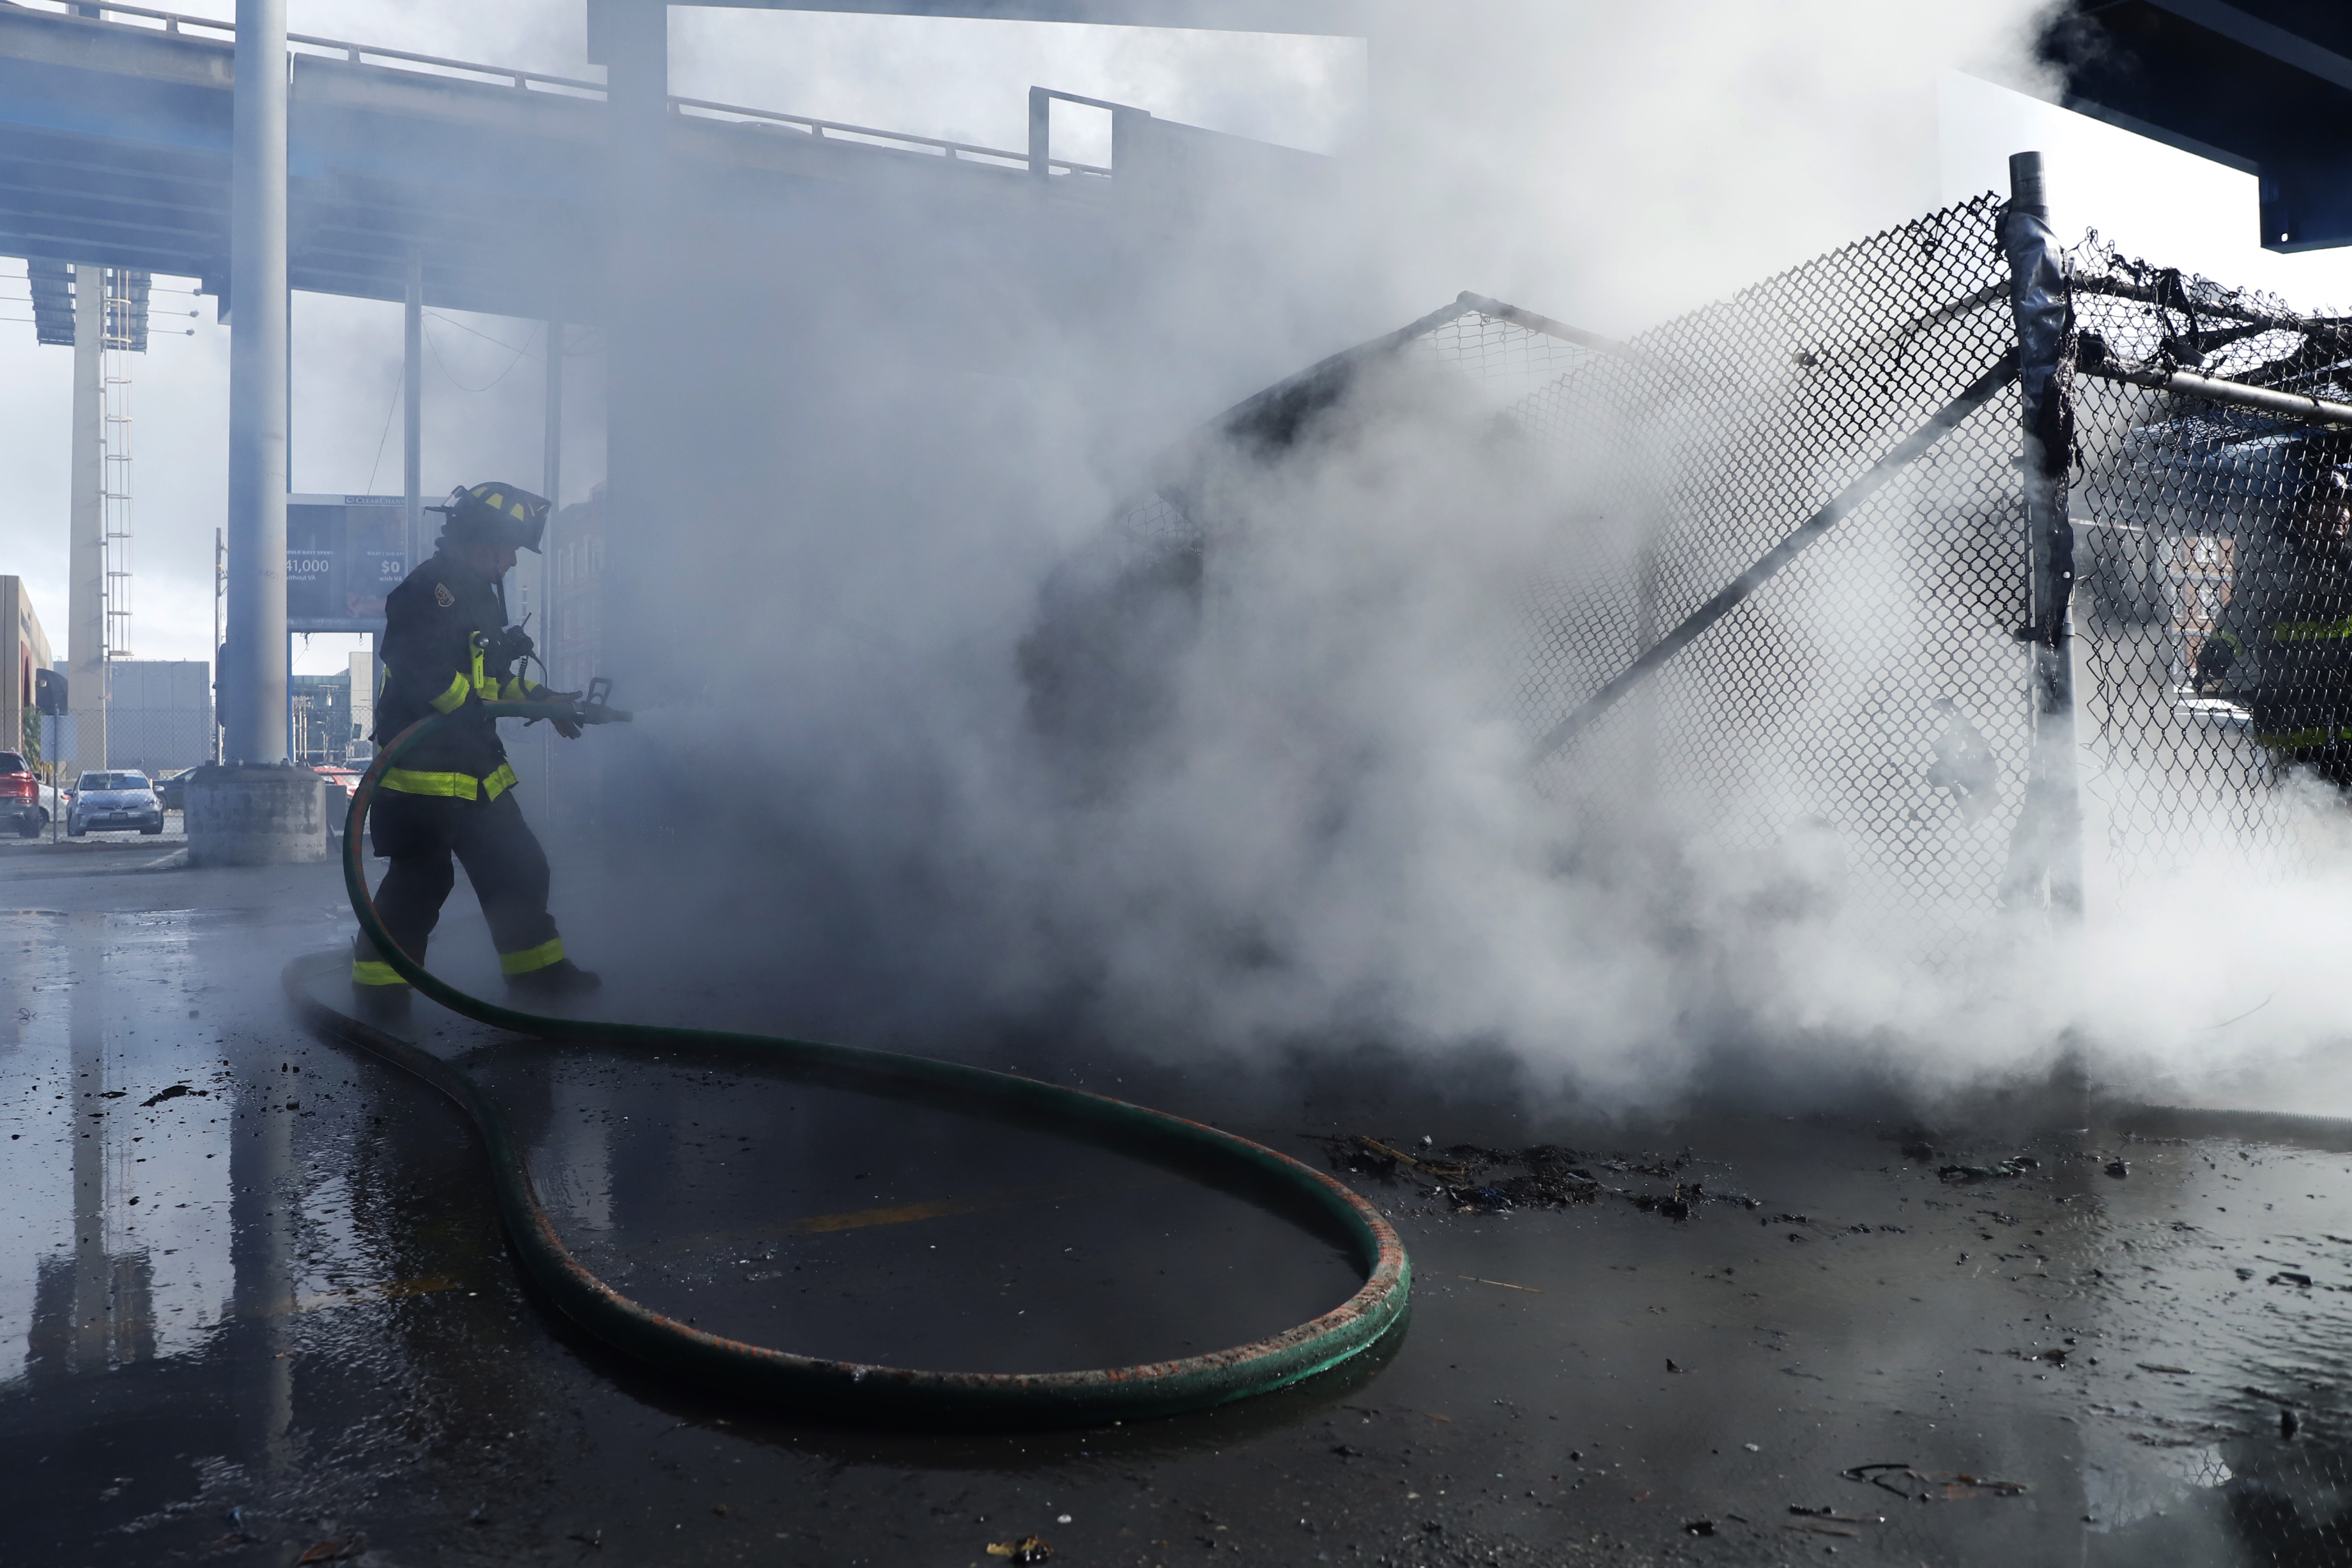 San Francisco Fire Department firefighters attempt to put out a homeless encampment fire in a CalTrans parking lot on Division Street.